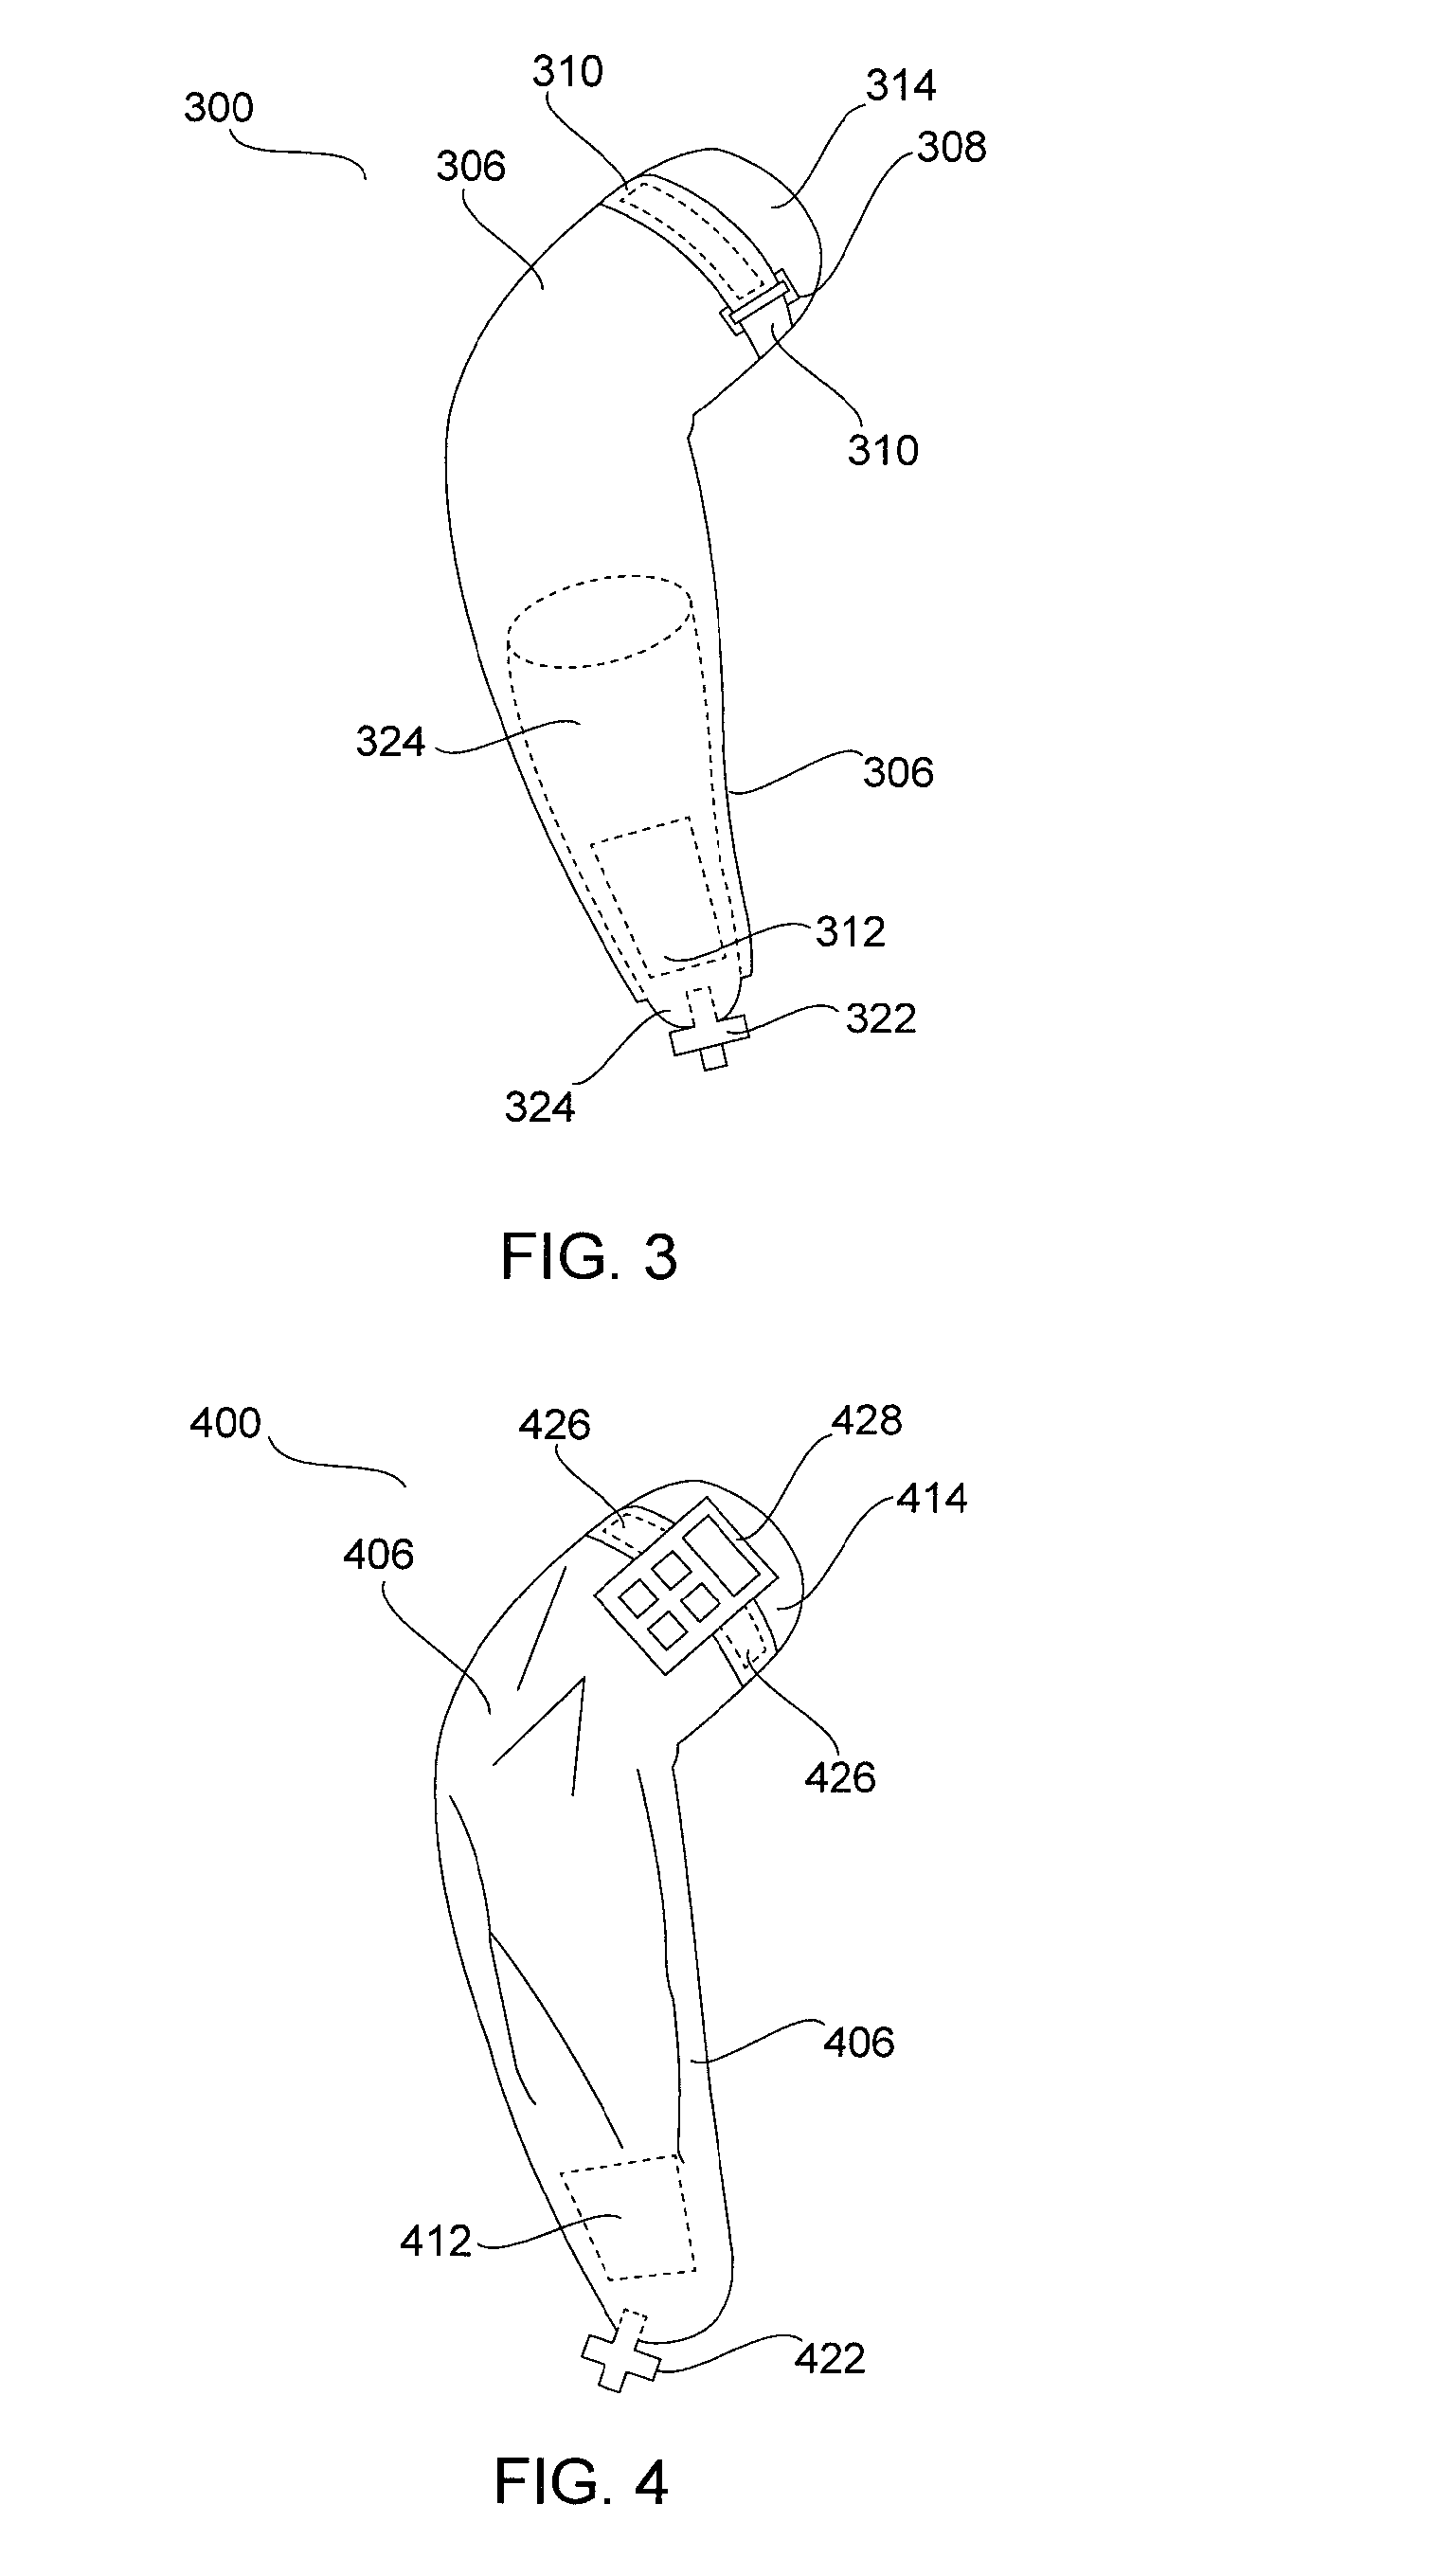 Apparatus for assisting with the physiological recovery from fatigue, stress or injury